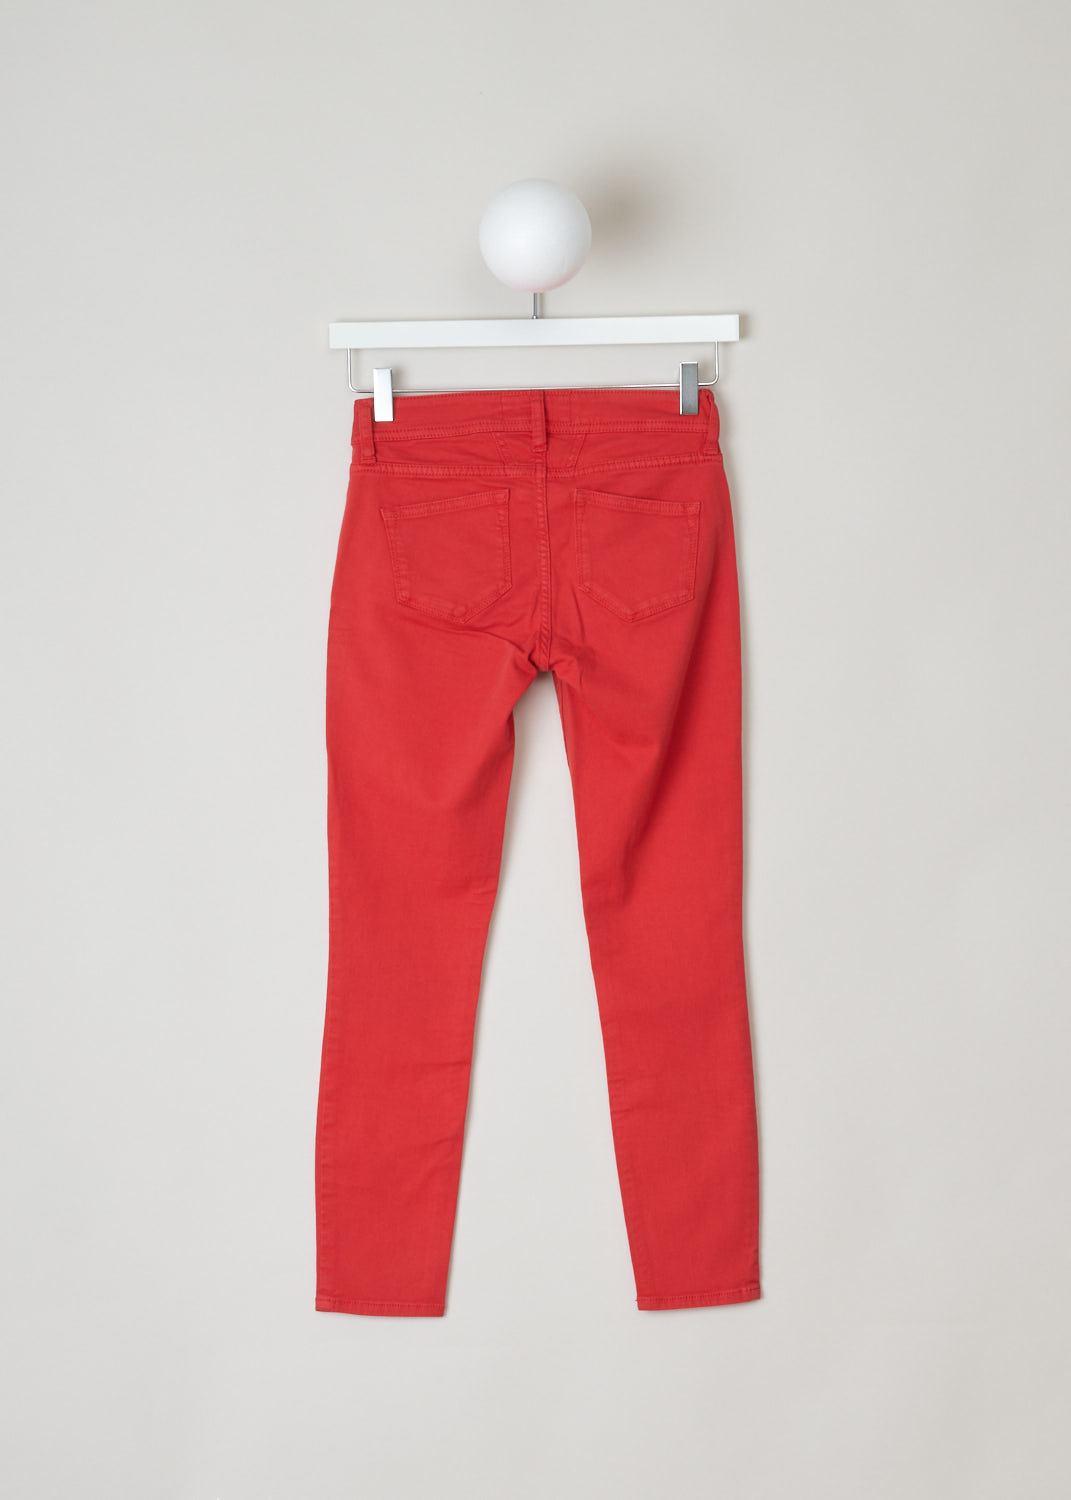 Closed, Slim-fit mid-waist red jeans, baker_C91833_07N_3L_343, red, back, Mid-waist slim-fit jeans made with cropped length, to show off any shoe you are wearing. Comes with the traditional 5 pockets and as you fastening option you get a zipper and button on the front. 